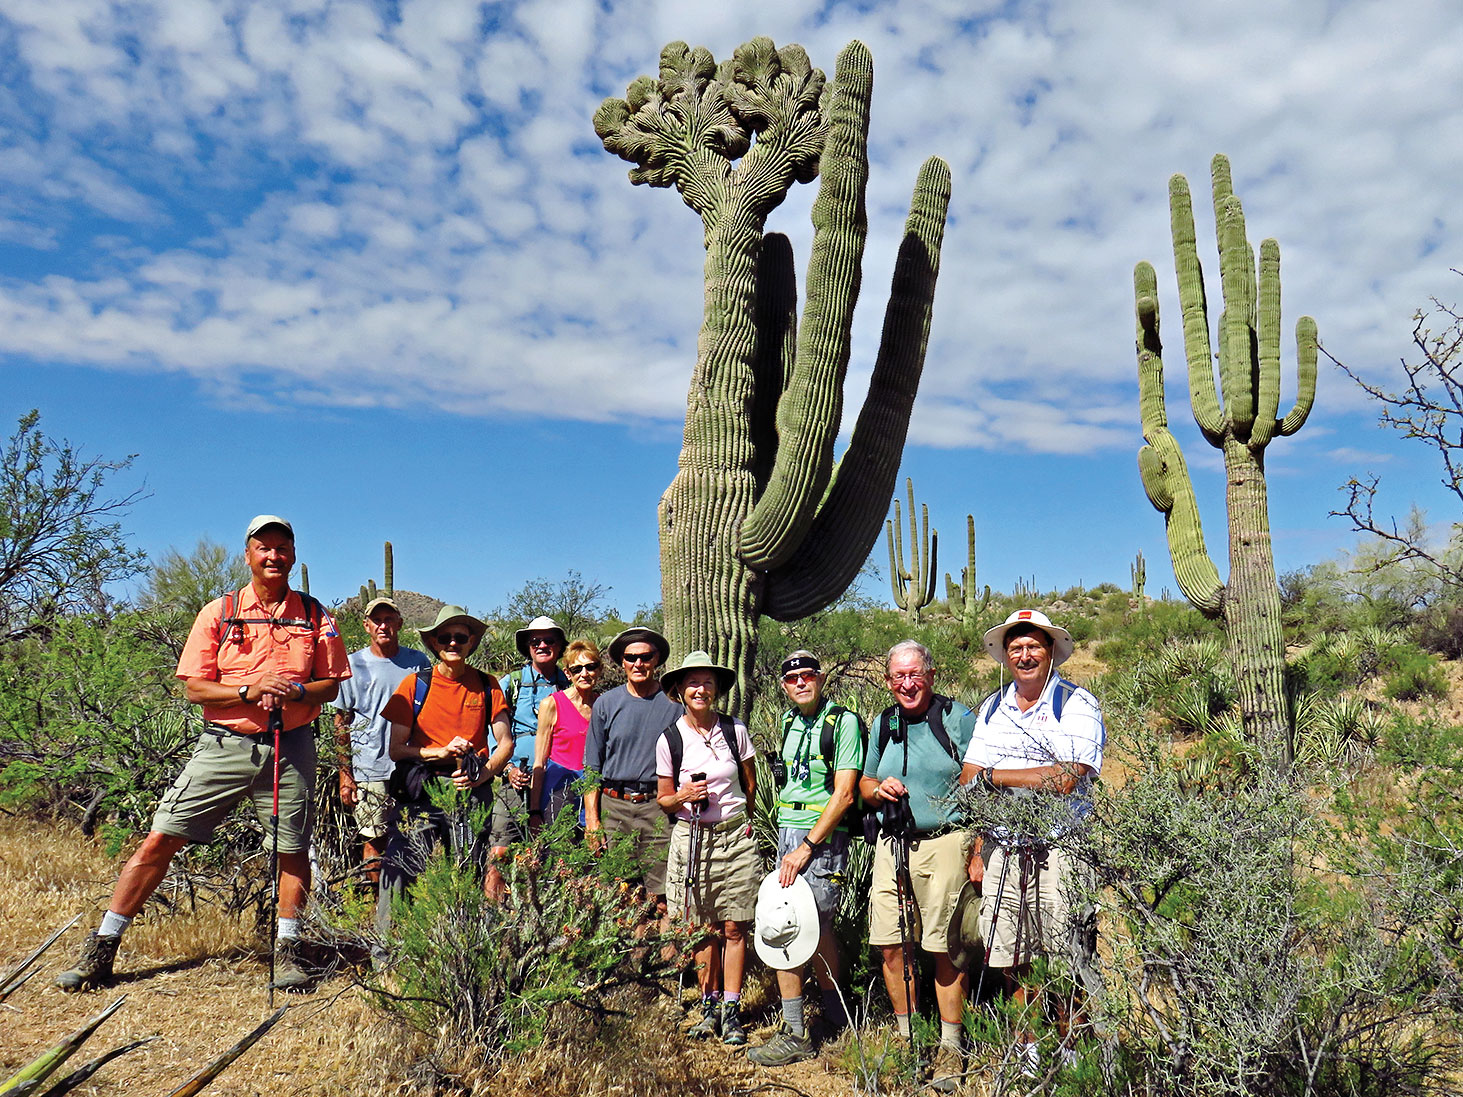 Left to right: Tom Wellman, Clare Bangs, Pete Williams (hike leader), Jim Gillespie, Betty Garner, Wayne Wills, Ann Rohlman, Lynn Warren (photographer), Joe Clarkson and Steve Duncanson pausing for a photo op with a rare double crested saguaro just off the Granite Mountain loop trail.